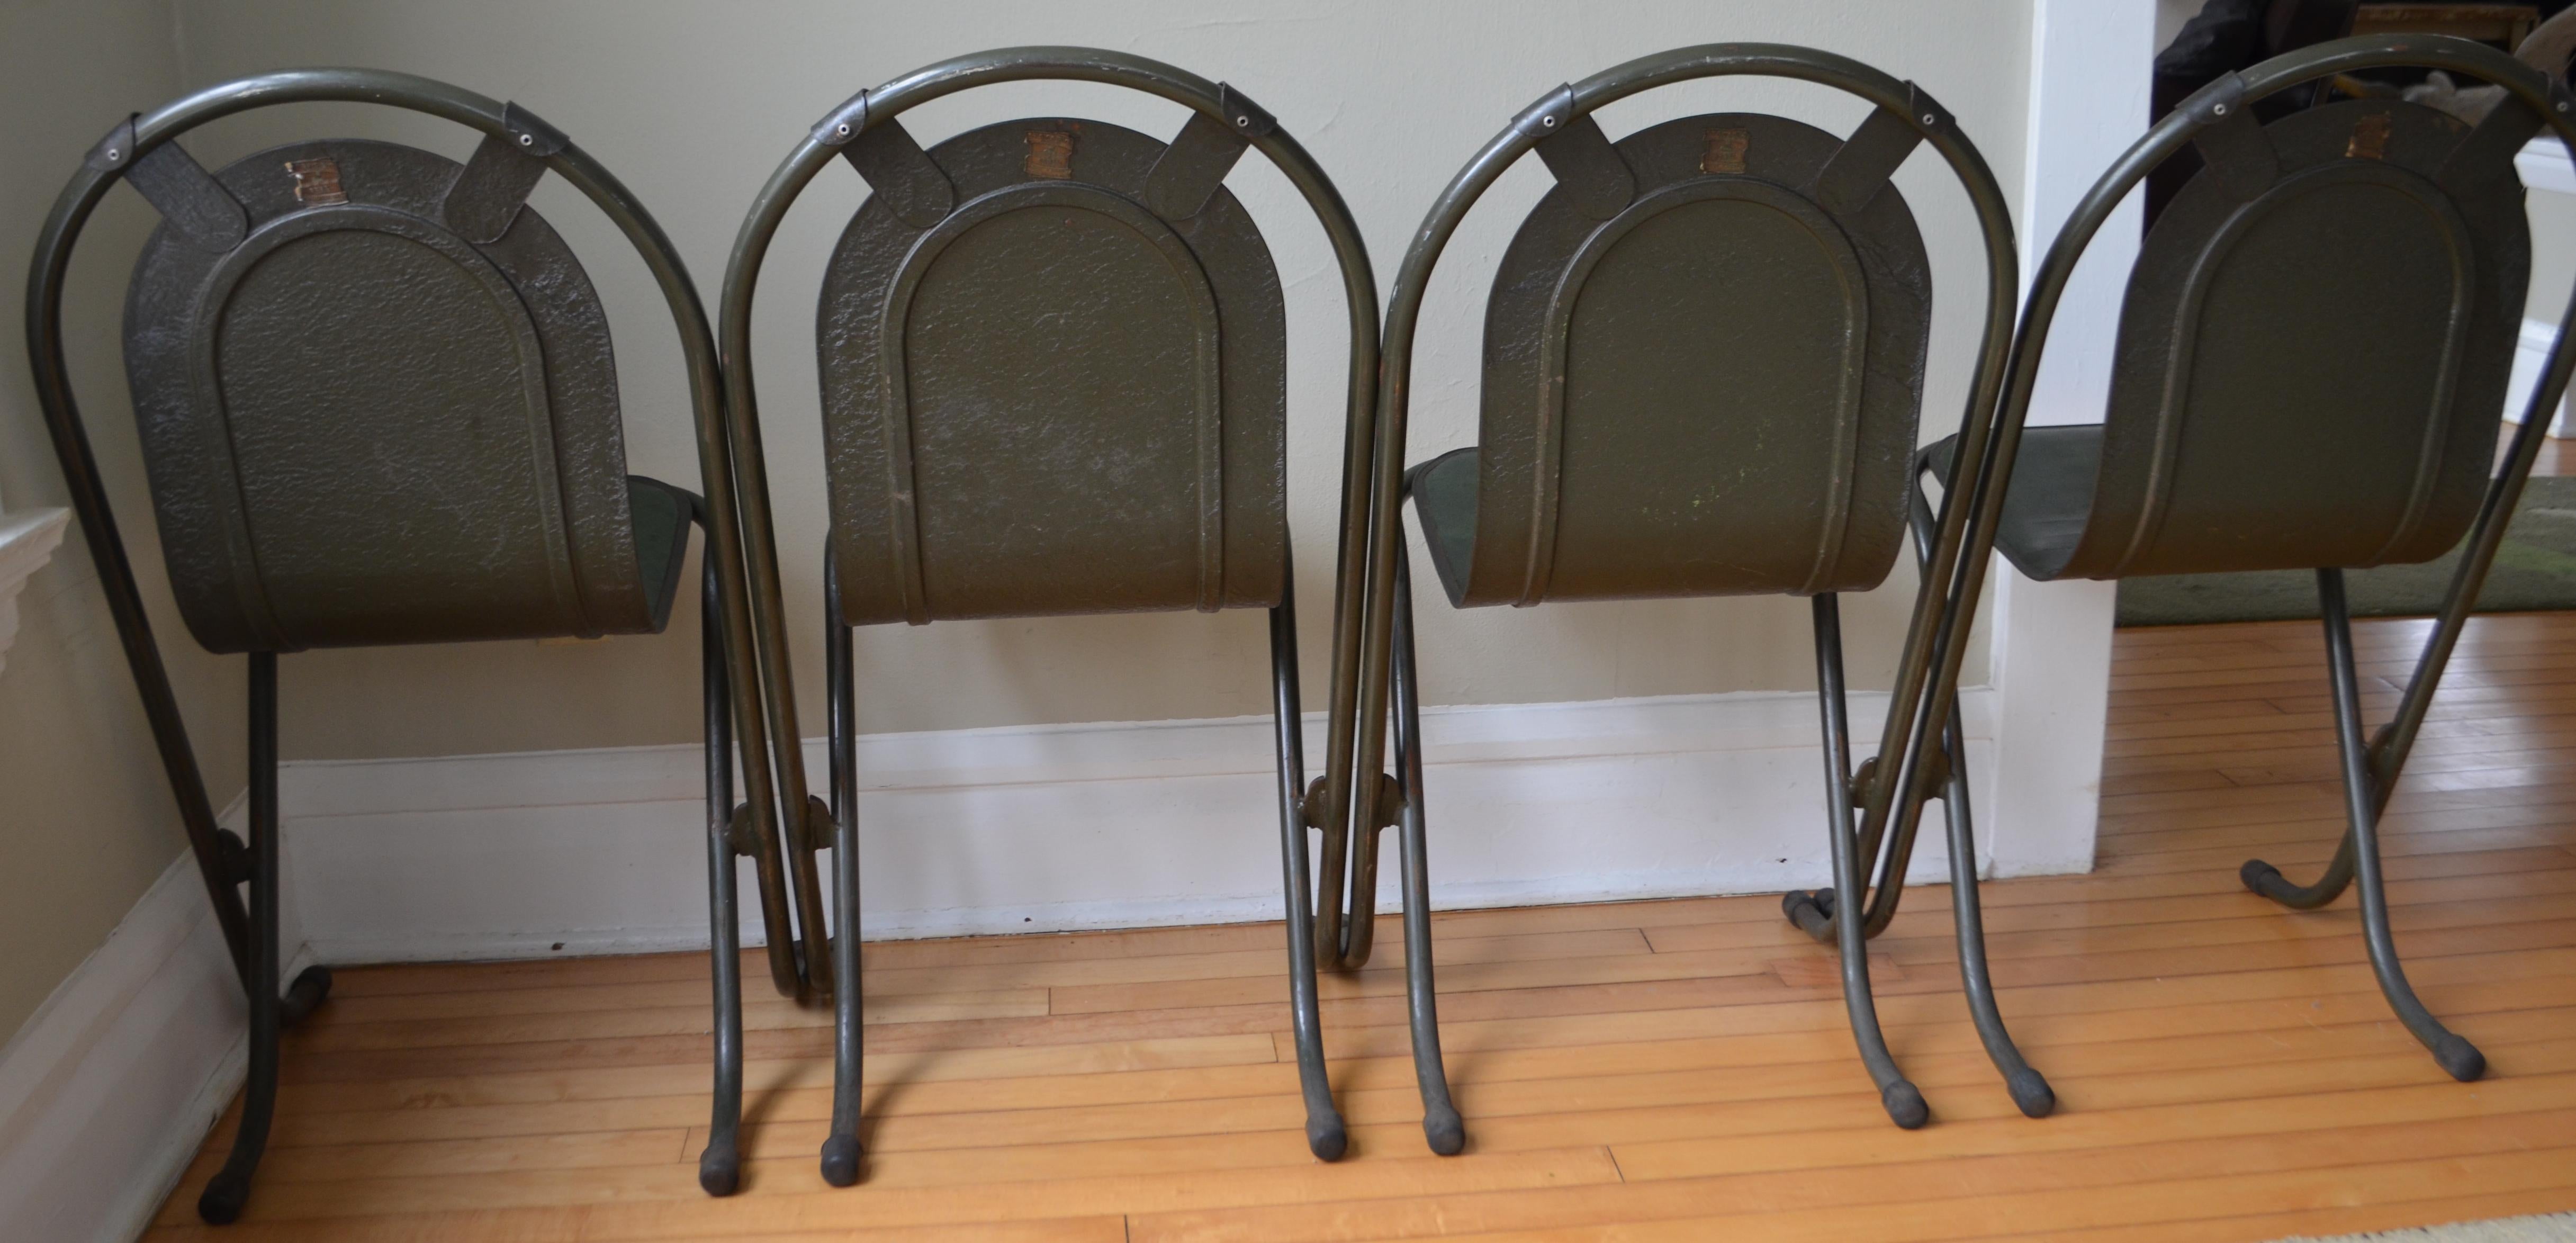 Stacking Chairs by Sebel, Pressed Metal Seat on Tubular Frame, Set of 4 For Sale 3